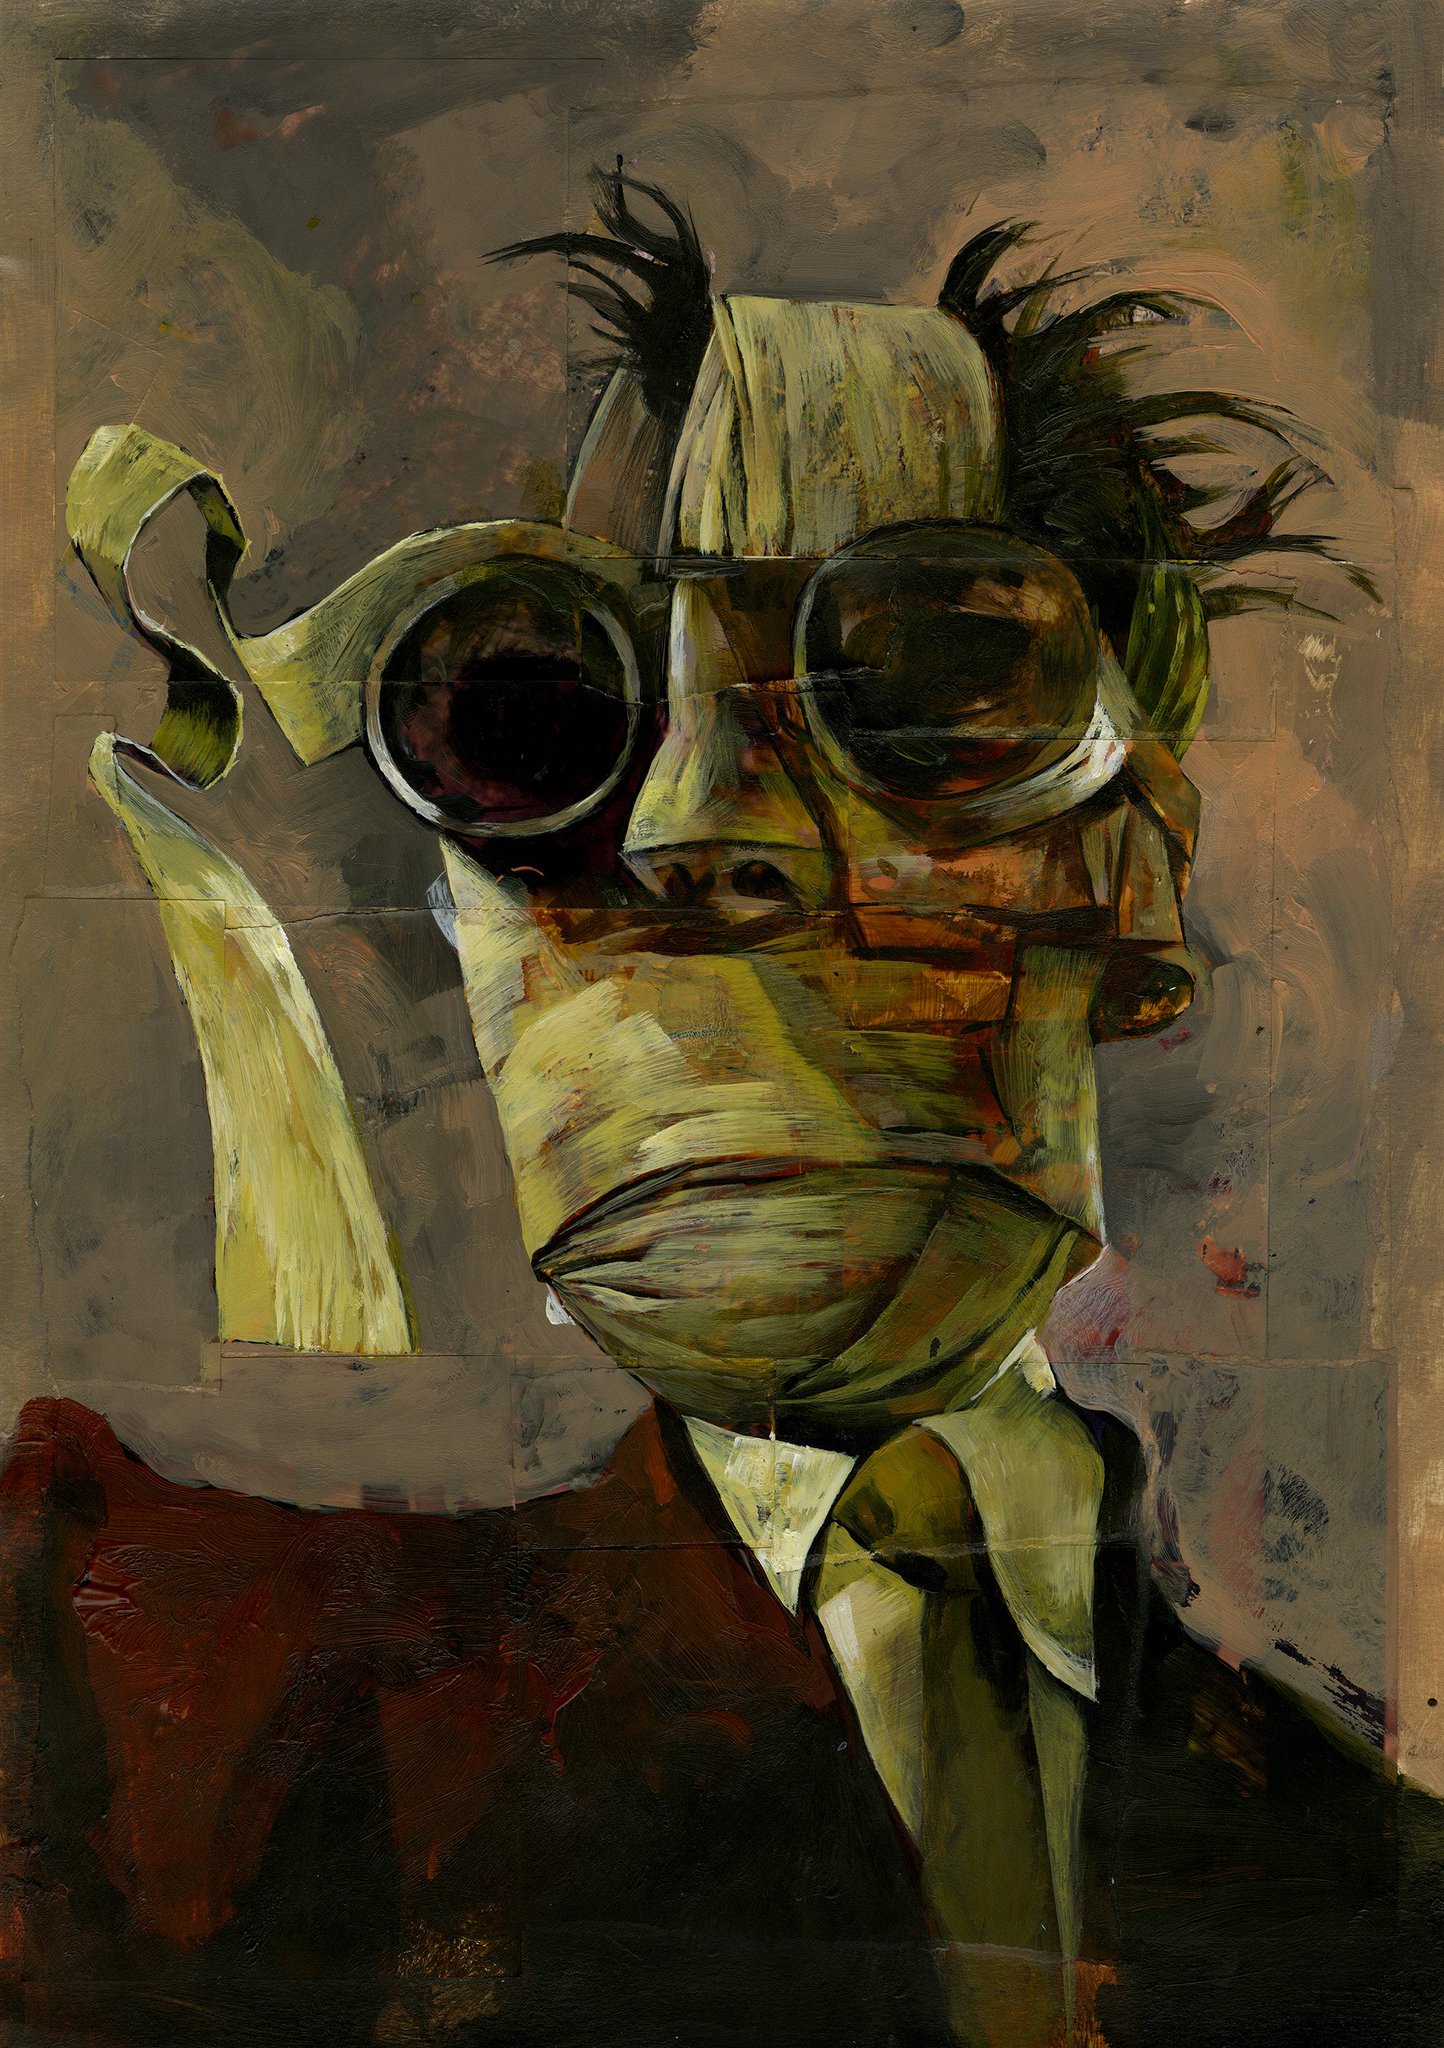 Dave McKean on Twitter: "Off to Comicon tomorrow - commissioned